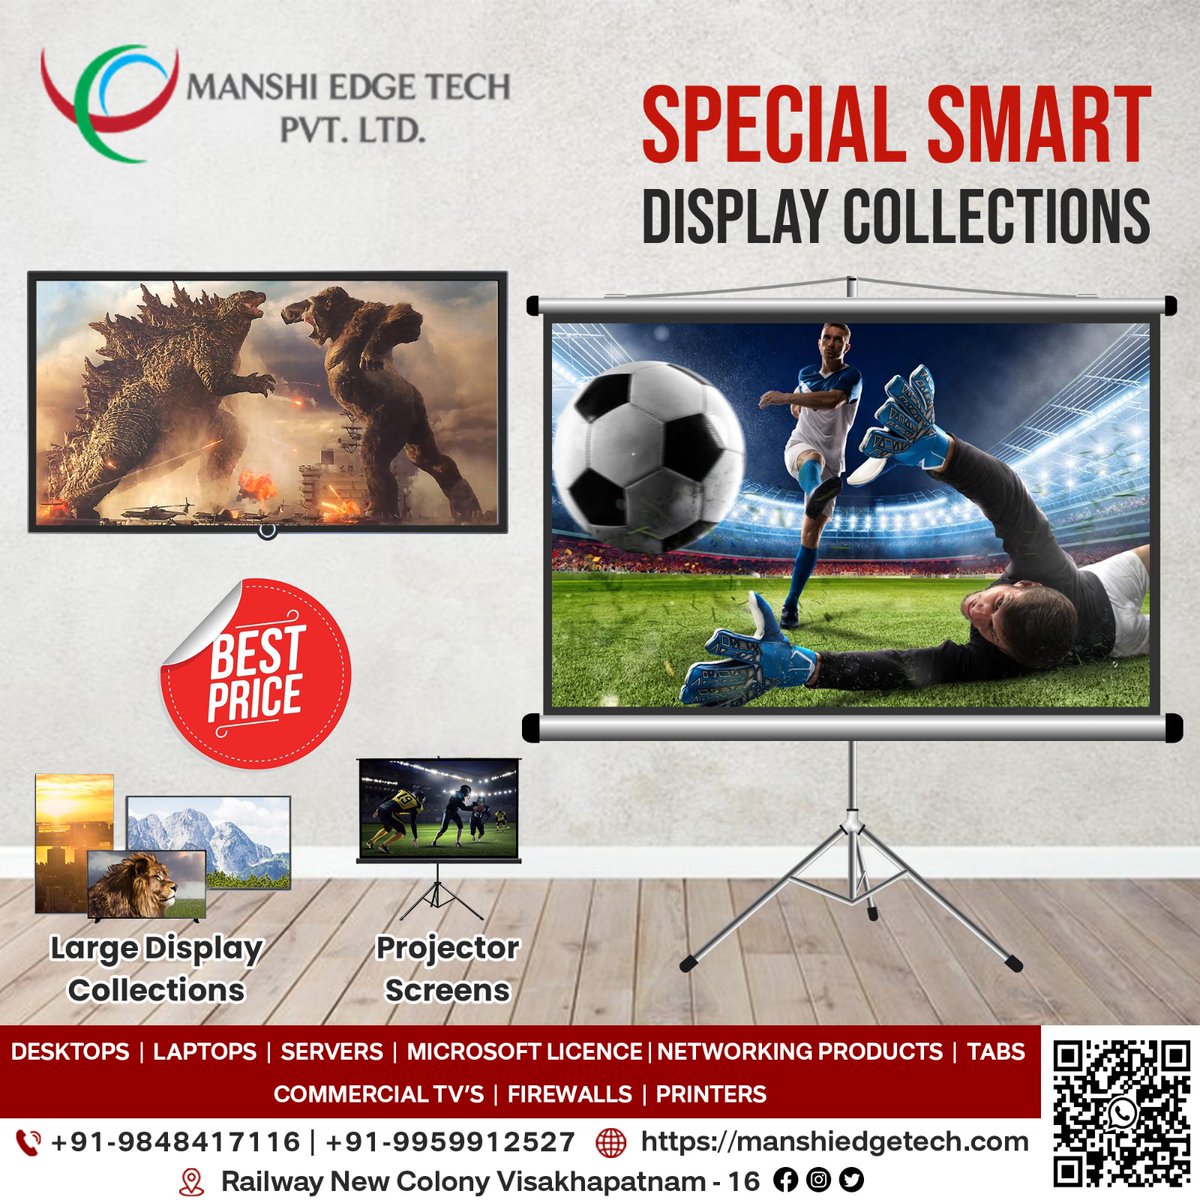 SPECIAL SMART DISPLAY COLLECTIONS!...
1.Large Display Collections 2.Projector Screens.
#projector #vision #lcdprojector #ledprojector #LED #CRT #laserprojectors #laserprojection #crtprojector #dlpprojector #sale #salesalesale #projectorscreen #LCD #DLP #laser